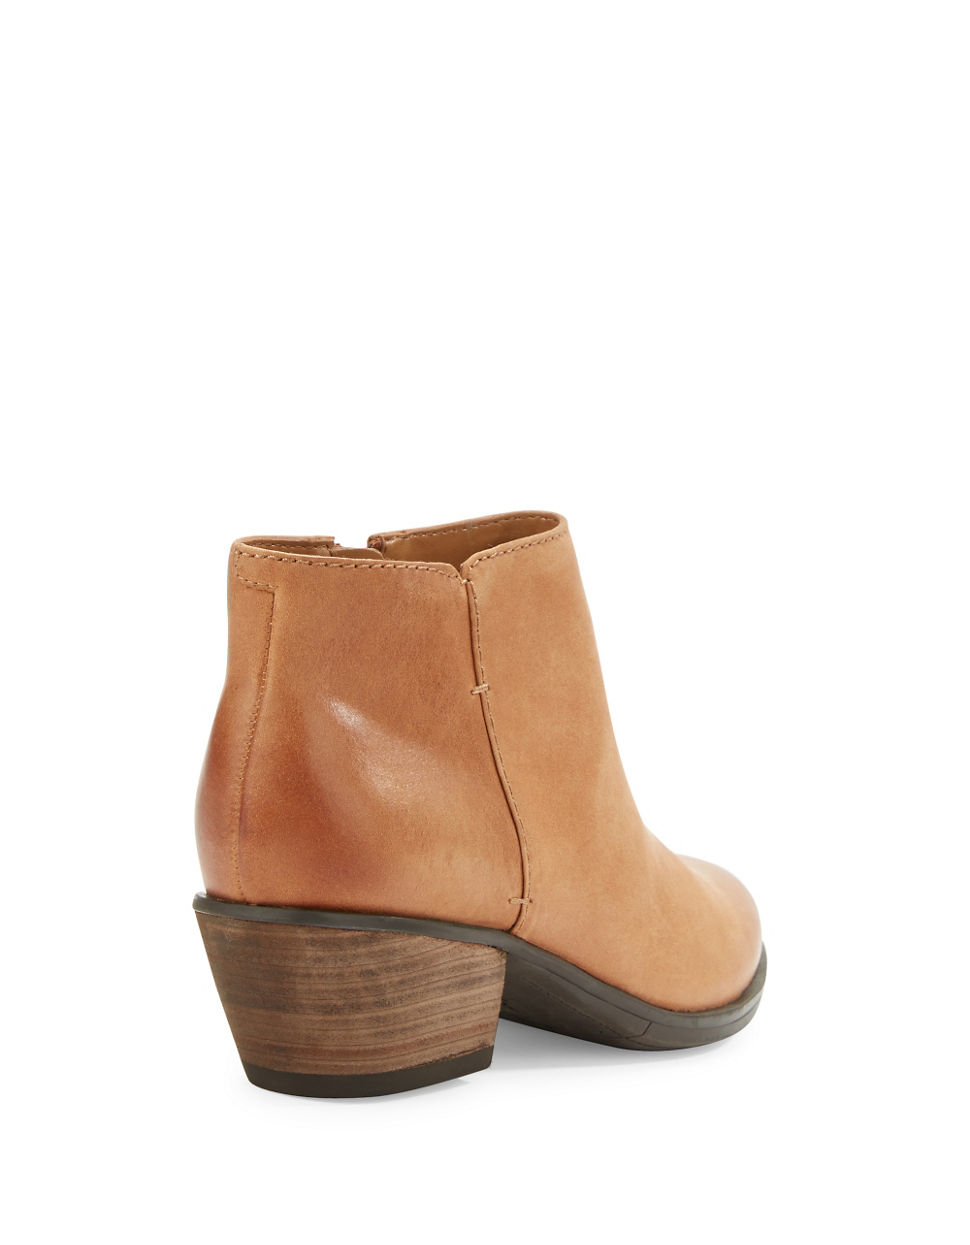 clarks brown ankle boots